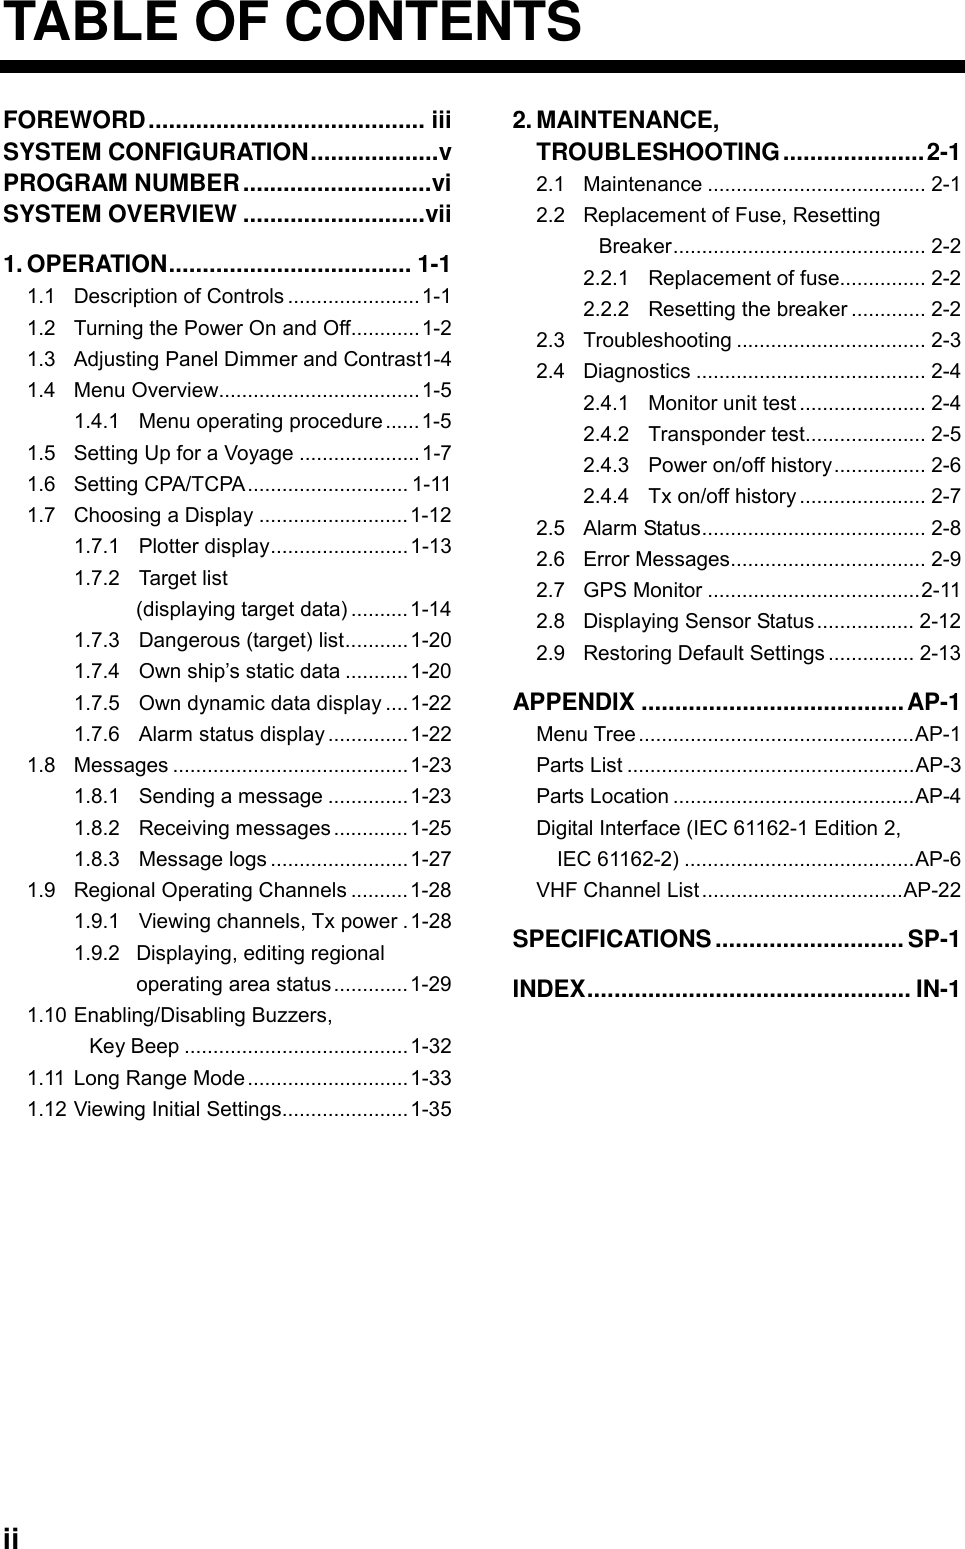  ii TABLE OF CONTENTS FOREWORD......................................... iii SYSTEM CONFIGURATION...................v PROGRAM NUMBER............................vi SYSTEM OVERVIEW ...........................vii 1. OPERATION.................................... 1-1 1.1 Description of Controls .......................1-1 1.2 Turning the Power On and Off............1-2 1.3 Adjusting Panel Dimmer and Contrast1-4 1.4 Menu Overview...................................1-5 1.4.1 Menu operating procedure ......1-5 1.5 Setting Up for a Voyage .....................1-7 1.6 Setting CPA/TCPA............................ 1-11 1.7 Choosing a Display ..........................1-12 1.7.1 Plotter display........................1-13 1.7.2 Target list (displaying target data) ..........1-14 1.7.3 Dangerous (target) list...........1-20 1.7.4 Own ship’s static data ...........1-20 1.7.5 Own dynamic data display ....1-22 1.7.6 Alarm status display ..............1-22 1.8 Messages .........................................1-23 1.8.1 Sending a message ..............1-23 1.8.2 Receiving messages .............1-25 1.8.3 Message logs ........................1-27 1.9 Regional Operating Channels ..........1-28 1.9.1 Viewing channels, Tx power .1-28 1.9.2 Displaying, editing regional   operating area status.............1-29 1.10 Enabling/Disabling Buzzers,   Key Beep .......................................1-32 1.11 Long Range Mode............................1-33 1.12 Viewing Initial Settings......................1-35 2. MAINTENANCE, TROUBLESHOOTING.....................2-1 2.1 Maintenance ...................................... 2-1 2.2 Replacement of Fuse, Resetting Breaker............................................ 2-2 2.2.1 Replacement of fuse............... 2-2 2.2.2 Resetting the breaker ............. 2-2 2.3 Troubleshooting ................................. 2-3 2.4 Diagnostics ........................................ 2-4 2.4.1 Monitor unit test ...................... 2-4 2.4.2 Transponder test..................... 2-5 2.4.3 Power on/off history................ 2-6 2.4.4 Tx on/off history ...................... 2-7 2.5 Alarm Status....................................... 2-8 2.6 Error Messages.................................. 2-9 2.7 GPS Monitor .....................................2-11 2.8 Displaying Sensor Status ................. 2-12 2.9 Restoring Default Settings ............... 2-13 APPENDIX .......................................AP-1 Menu Tree................................................AP-1 Parts List ..................................................AP-3 Parts Location ..........................................AP-4 Digital Interface (IEC 61162-1 Edition 2, IEC 61162-2) ........................................AP-6 VHF Channel List ...................................AP-22 SPECIFICATIONS............................SP-1 INDEX................................................ IN-1     